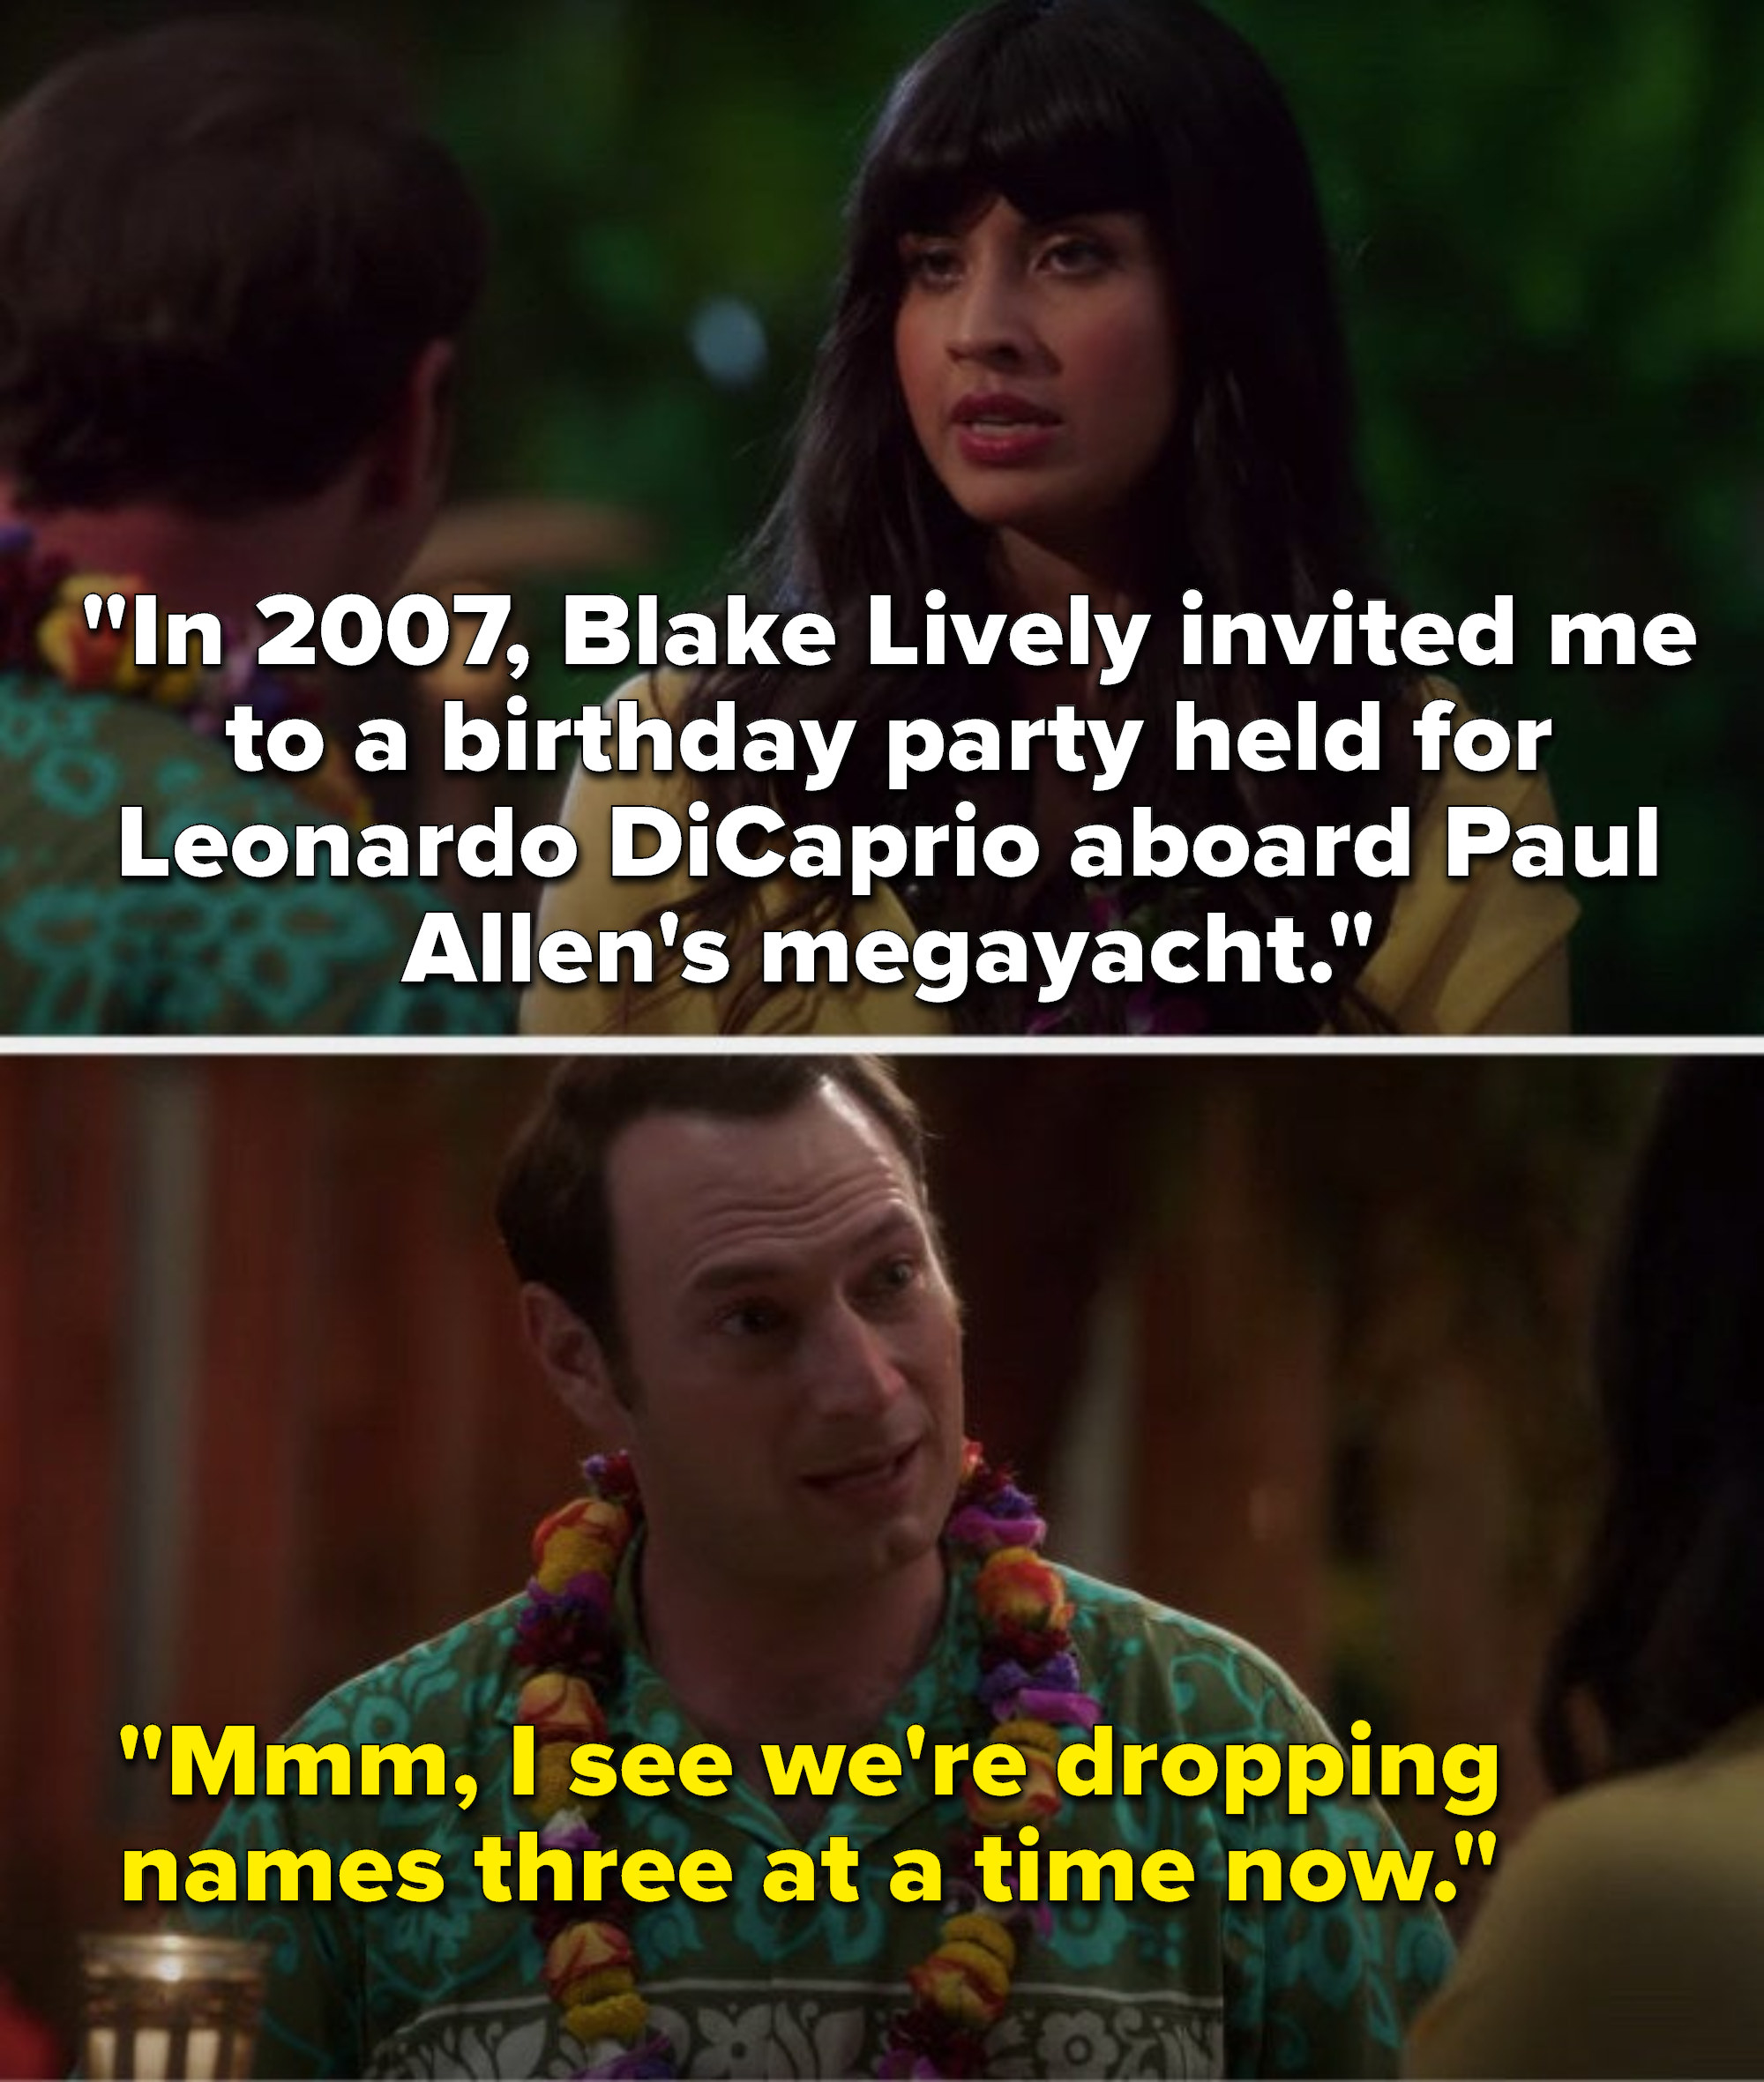 Tahani says, &quot;In 2007, Blake Lively invited me to a birthday party held for Leonardo DiCaprio aboard Paul Allen&#x27;s megayacht, and John says, Mmm, I see we&#x27;re dropping names three at a time now